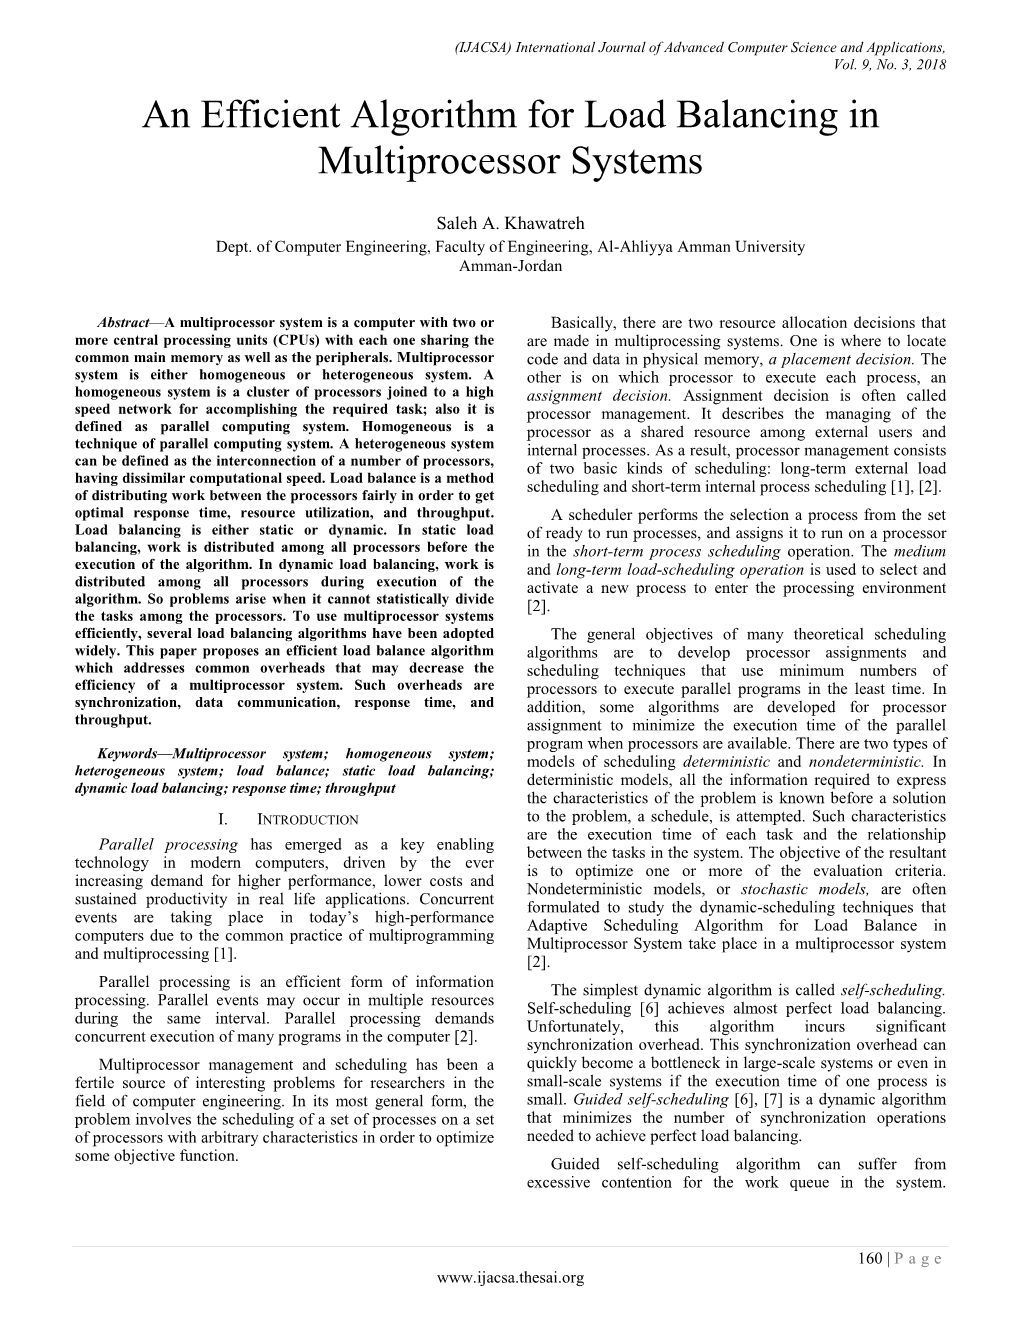 An Efficient Algorithm for Load Balancing in Multiprocessor Systems